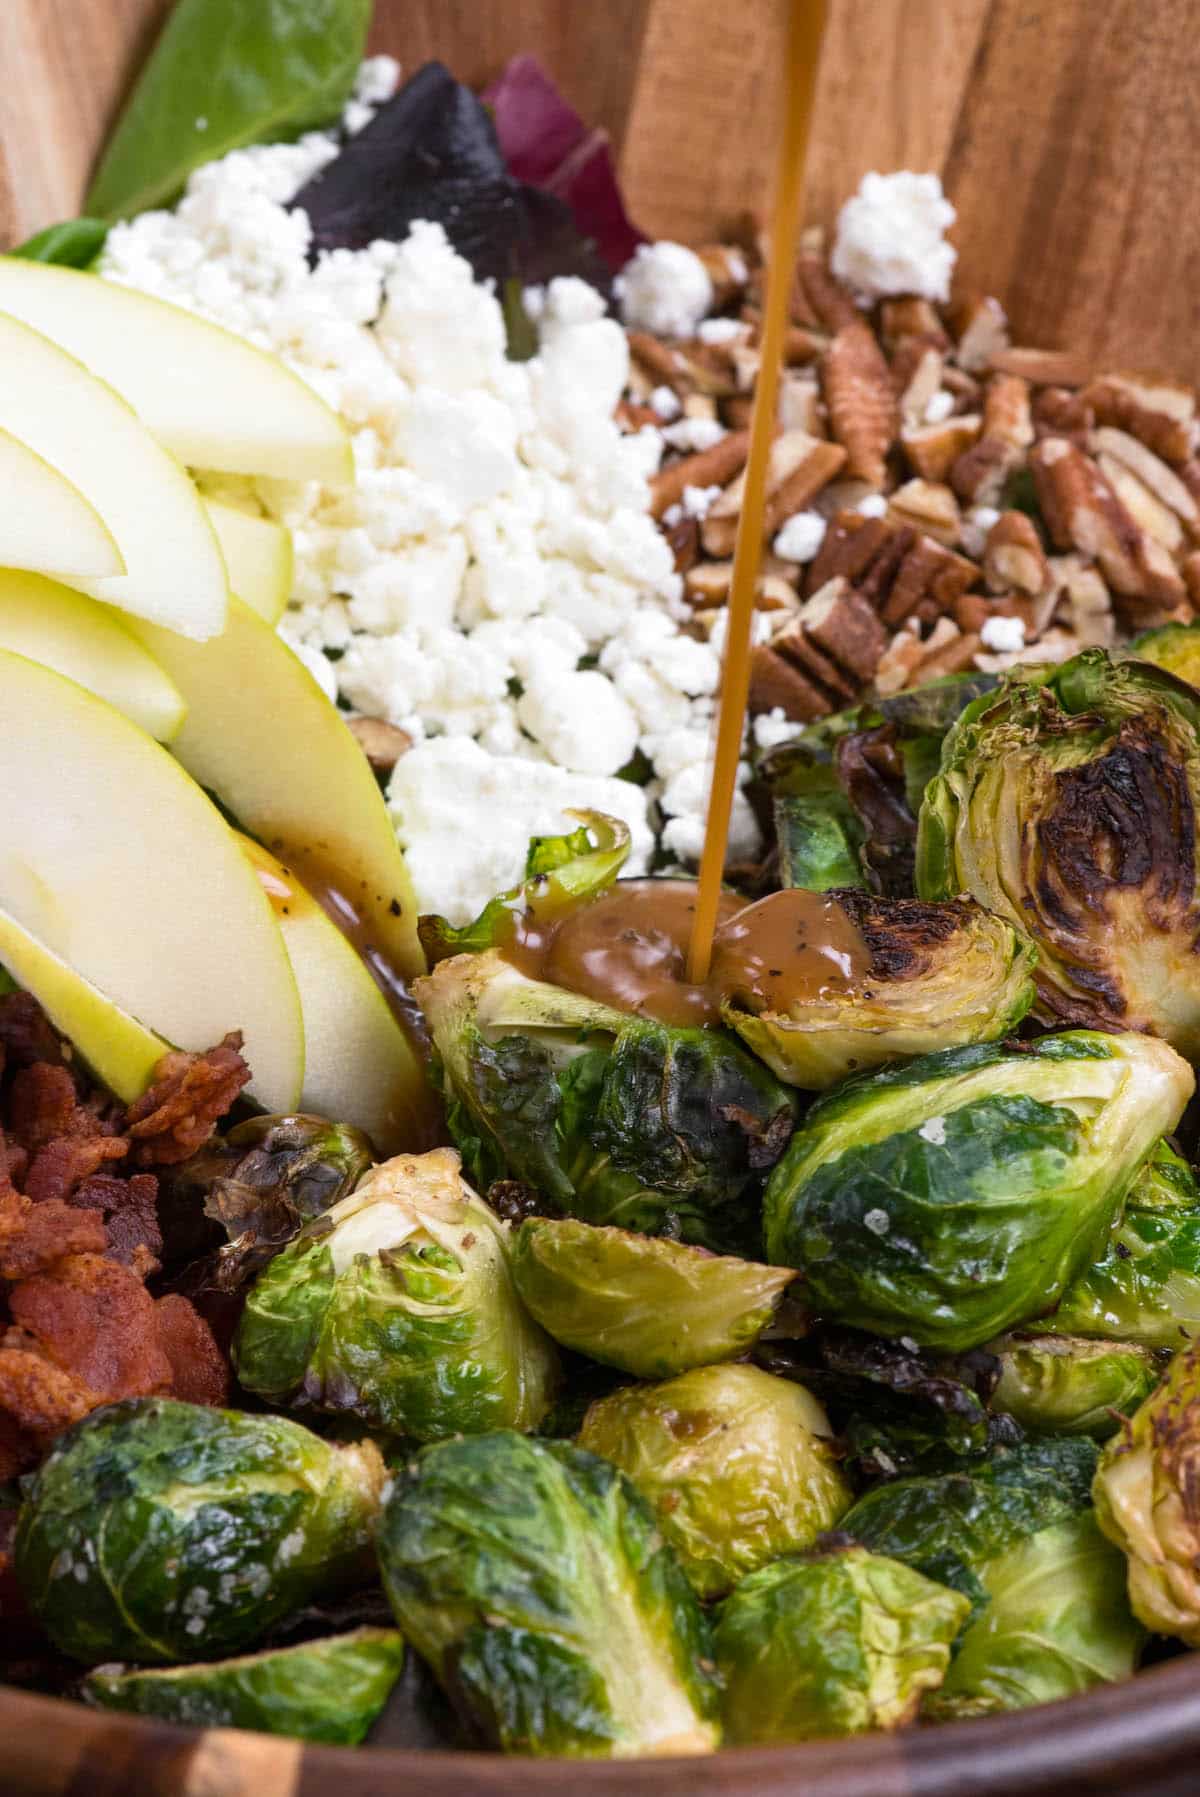 brussel sprout salad with all the ingredients including apples, Brussel sprouts, cheese, and bacon separated in a wooden bowl with dressing poured on top